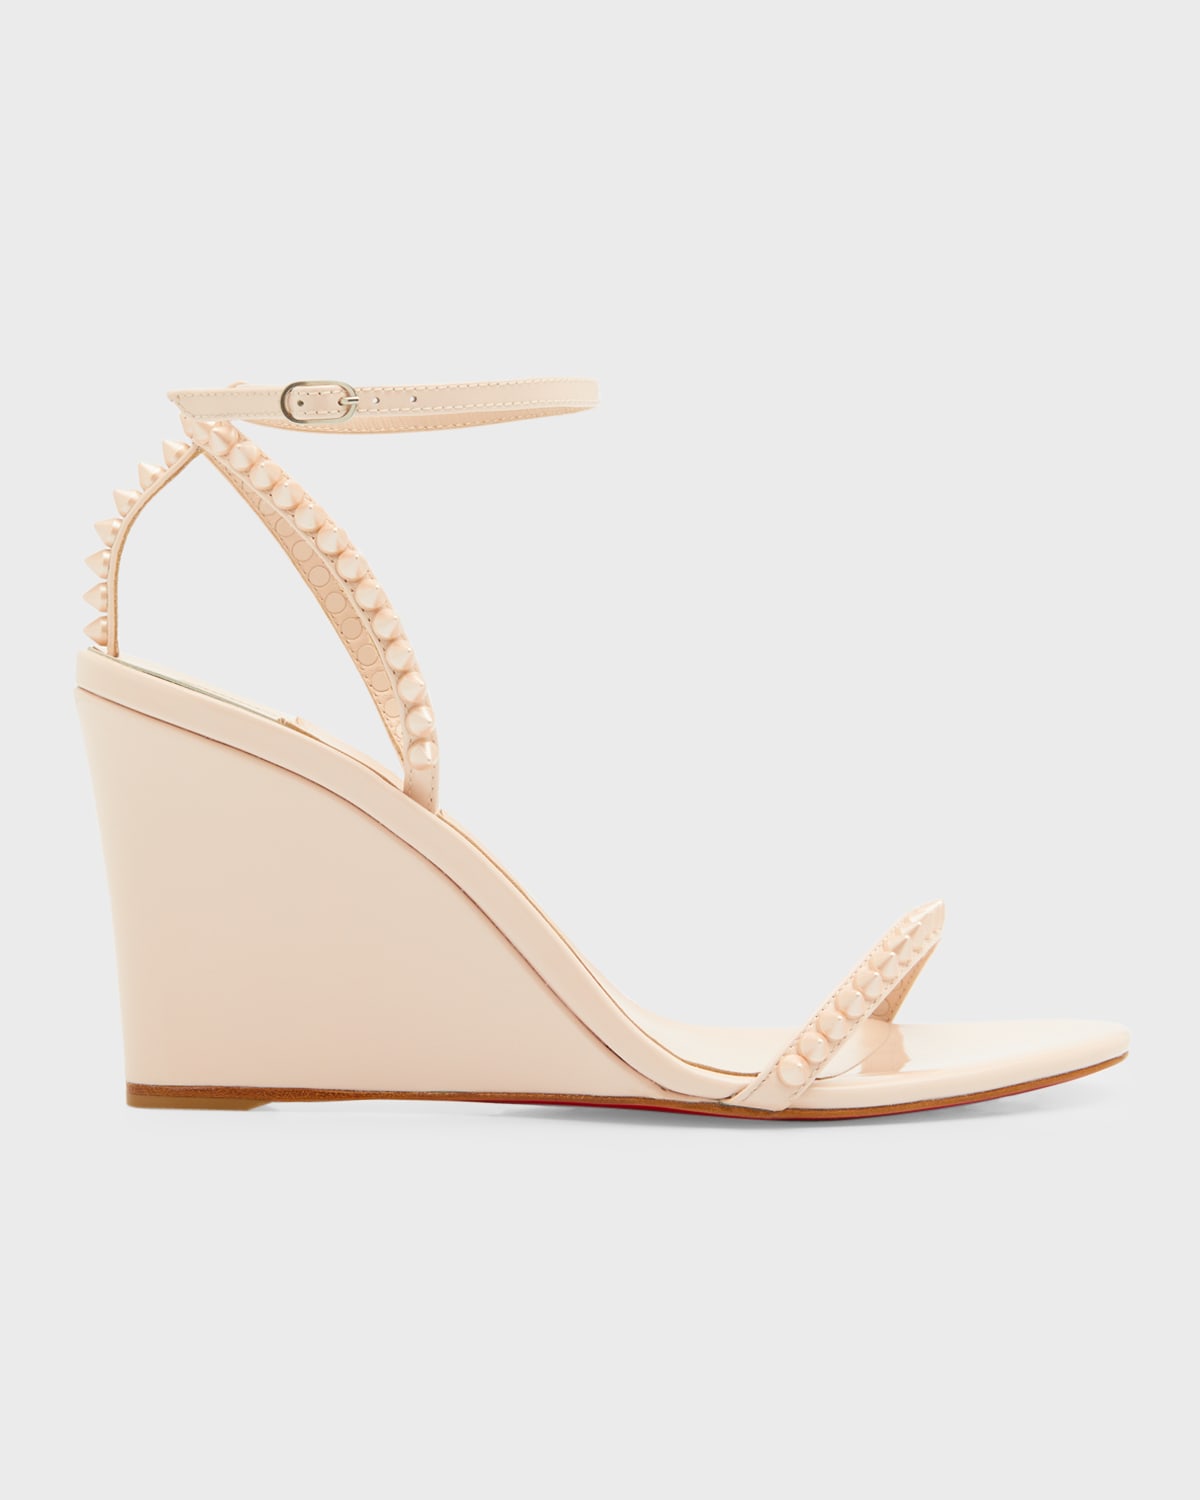 Christian Louboutin So Me Red Sole Spike Wedge Sandals In Leche